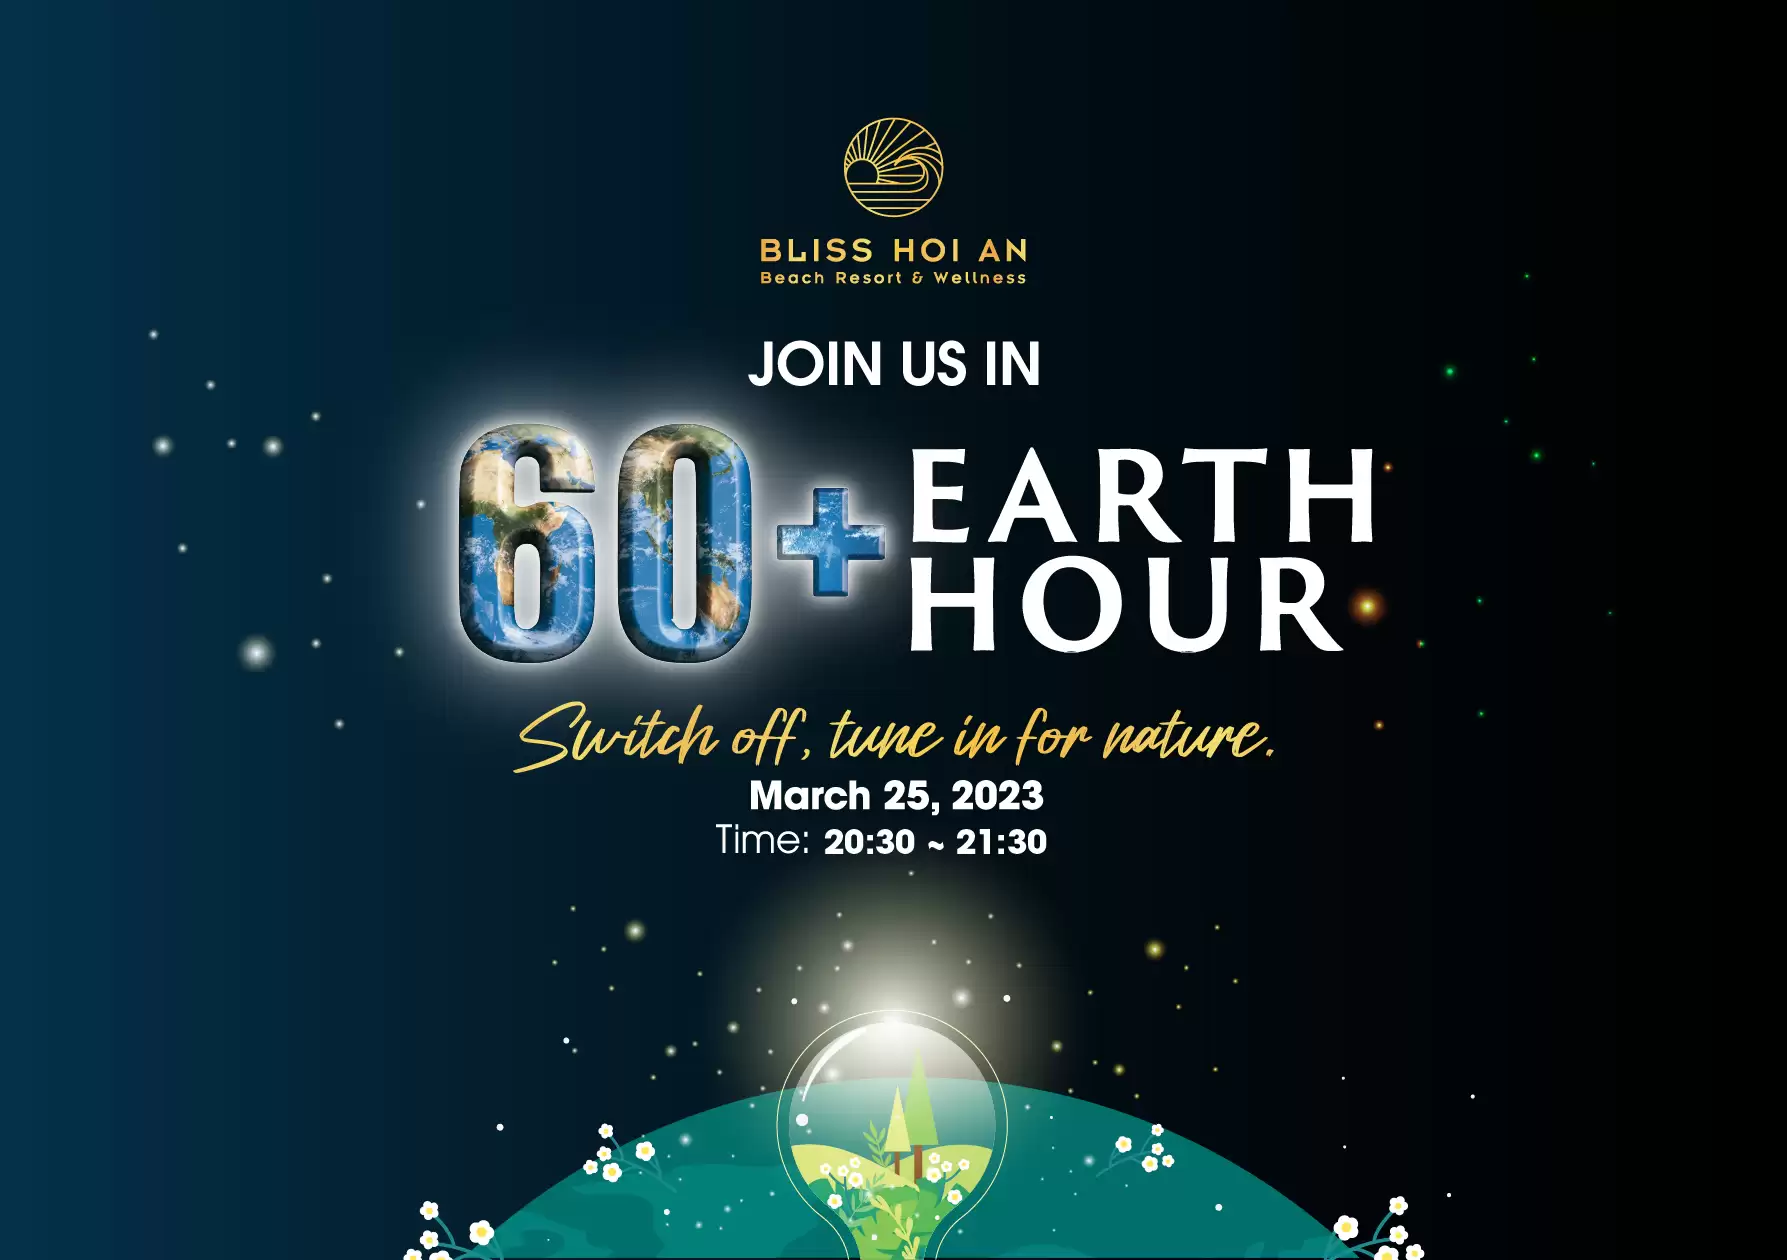 Join Us In The Bliss Hoi An Earth Hour - Switch off, tune in for nature